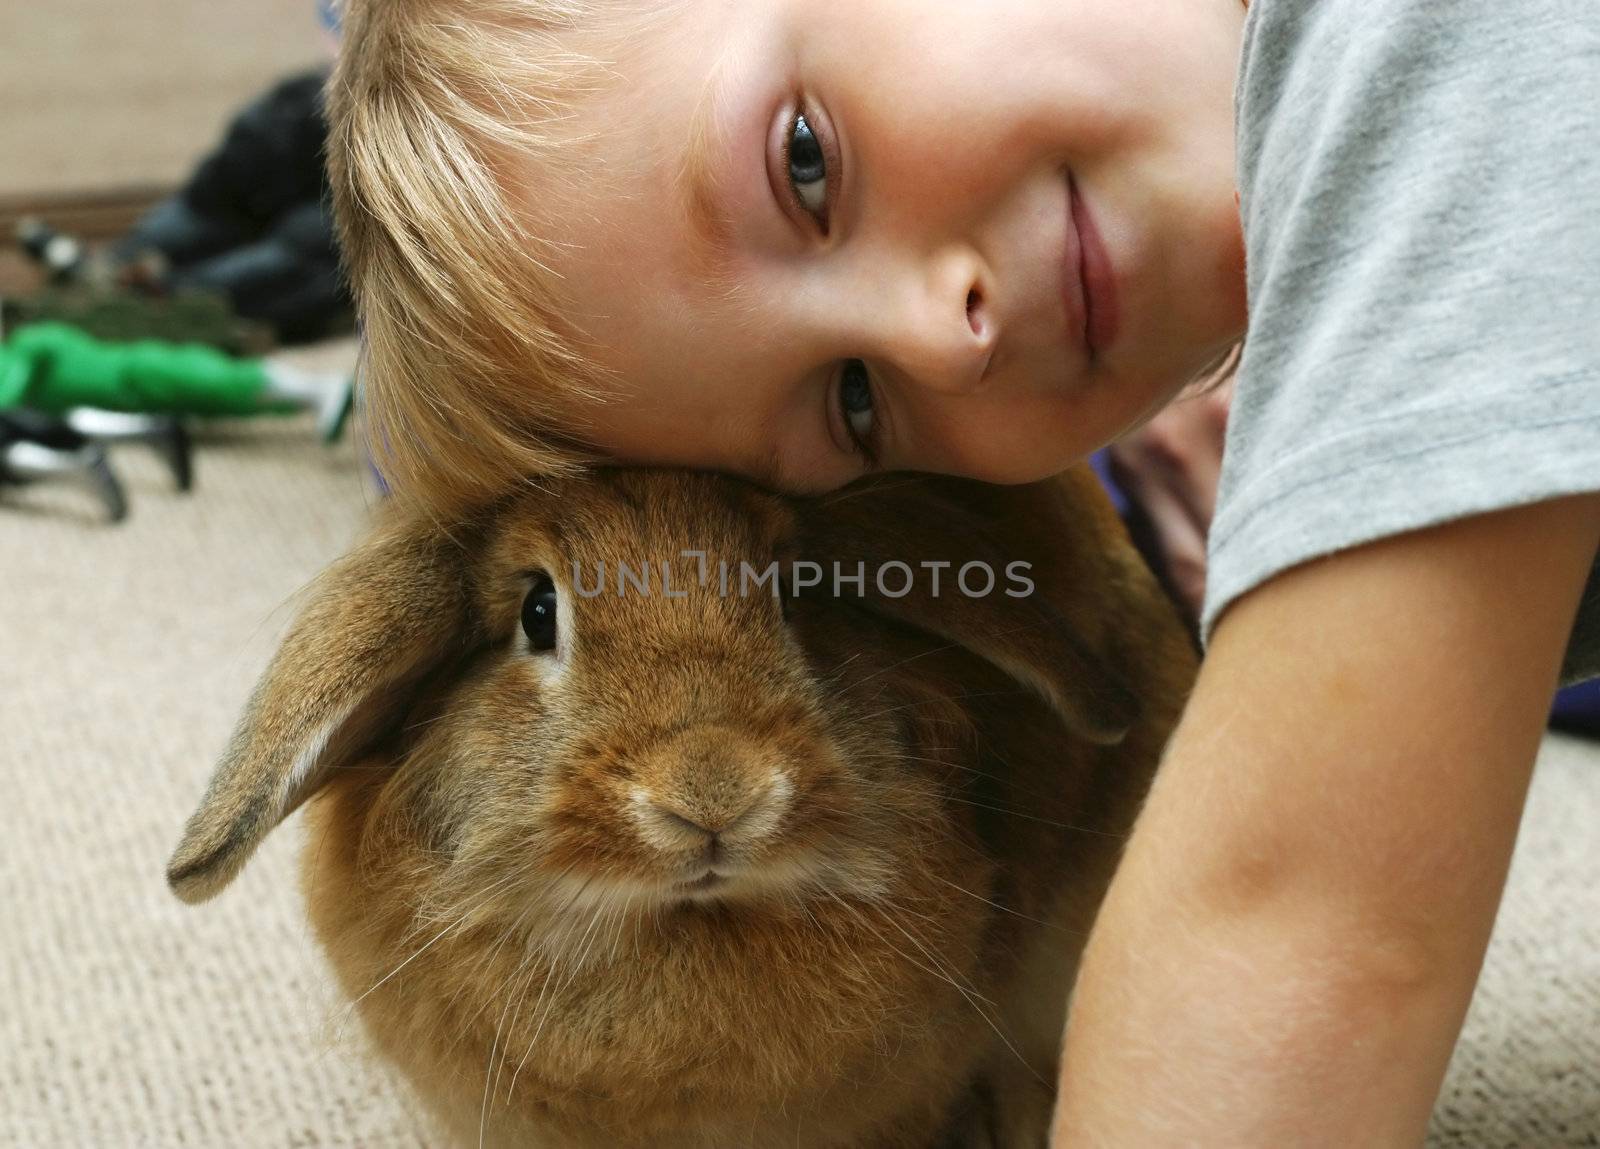 The boy with the rabbit by friday